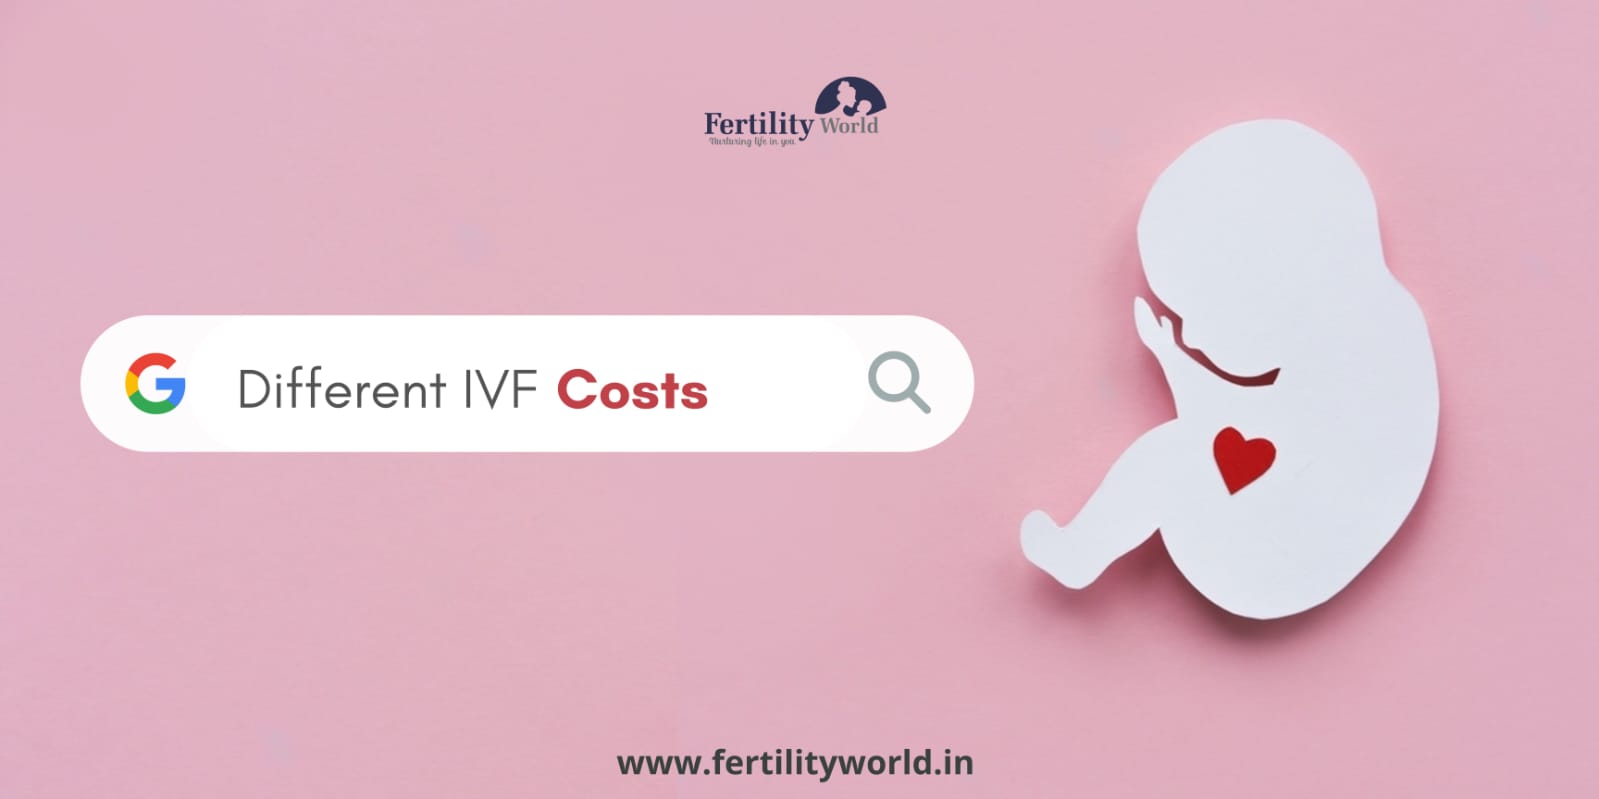 Different IVF costs treatment in the Philippines